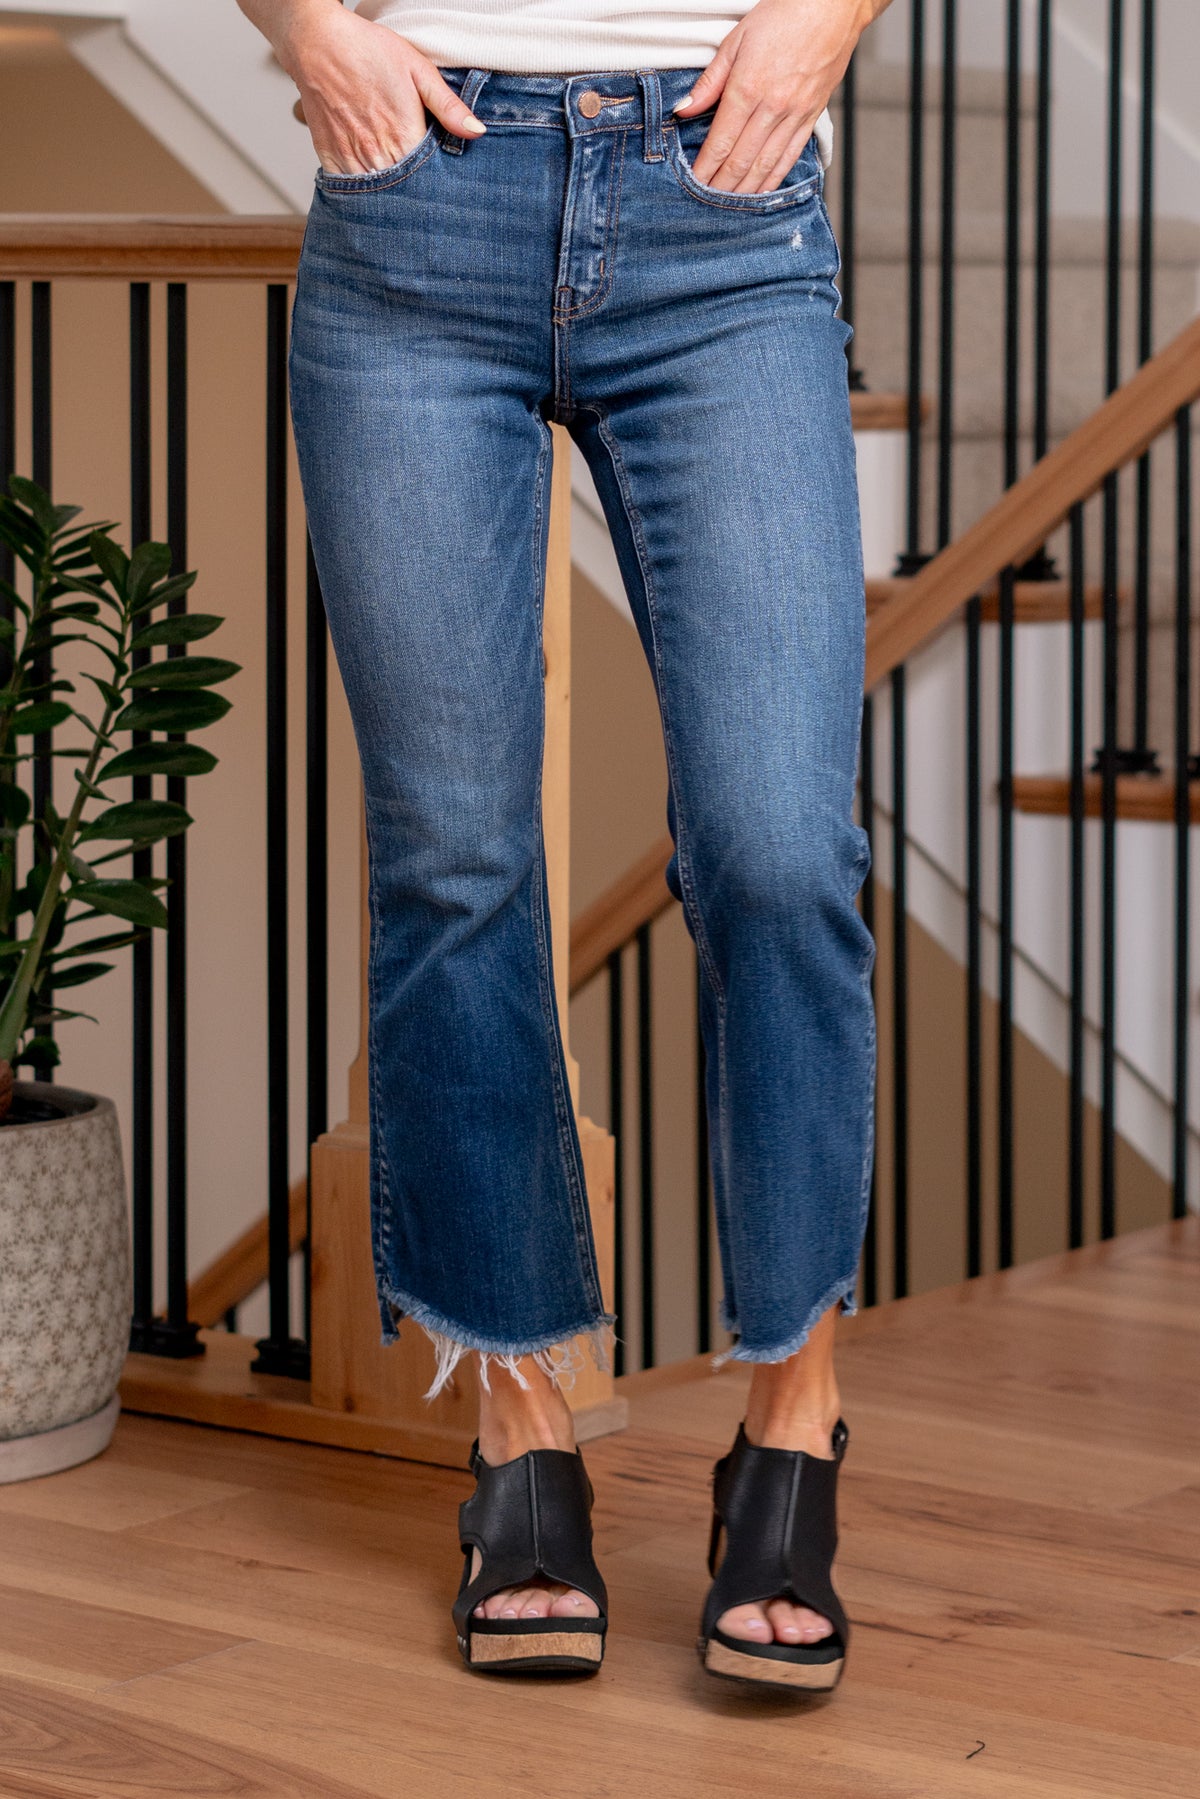 Flying Monkey  Infuse your wardrobe with a touch of creativity and style with the Ingenuity High Rise Step Hem Crop Flare jeans. These on-trend jeans feature a flattering high-rise silhouette, a cropped flare leg, and a distinctive step hem design.